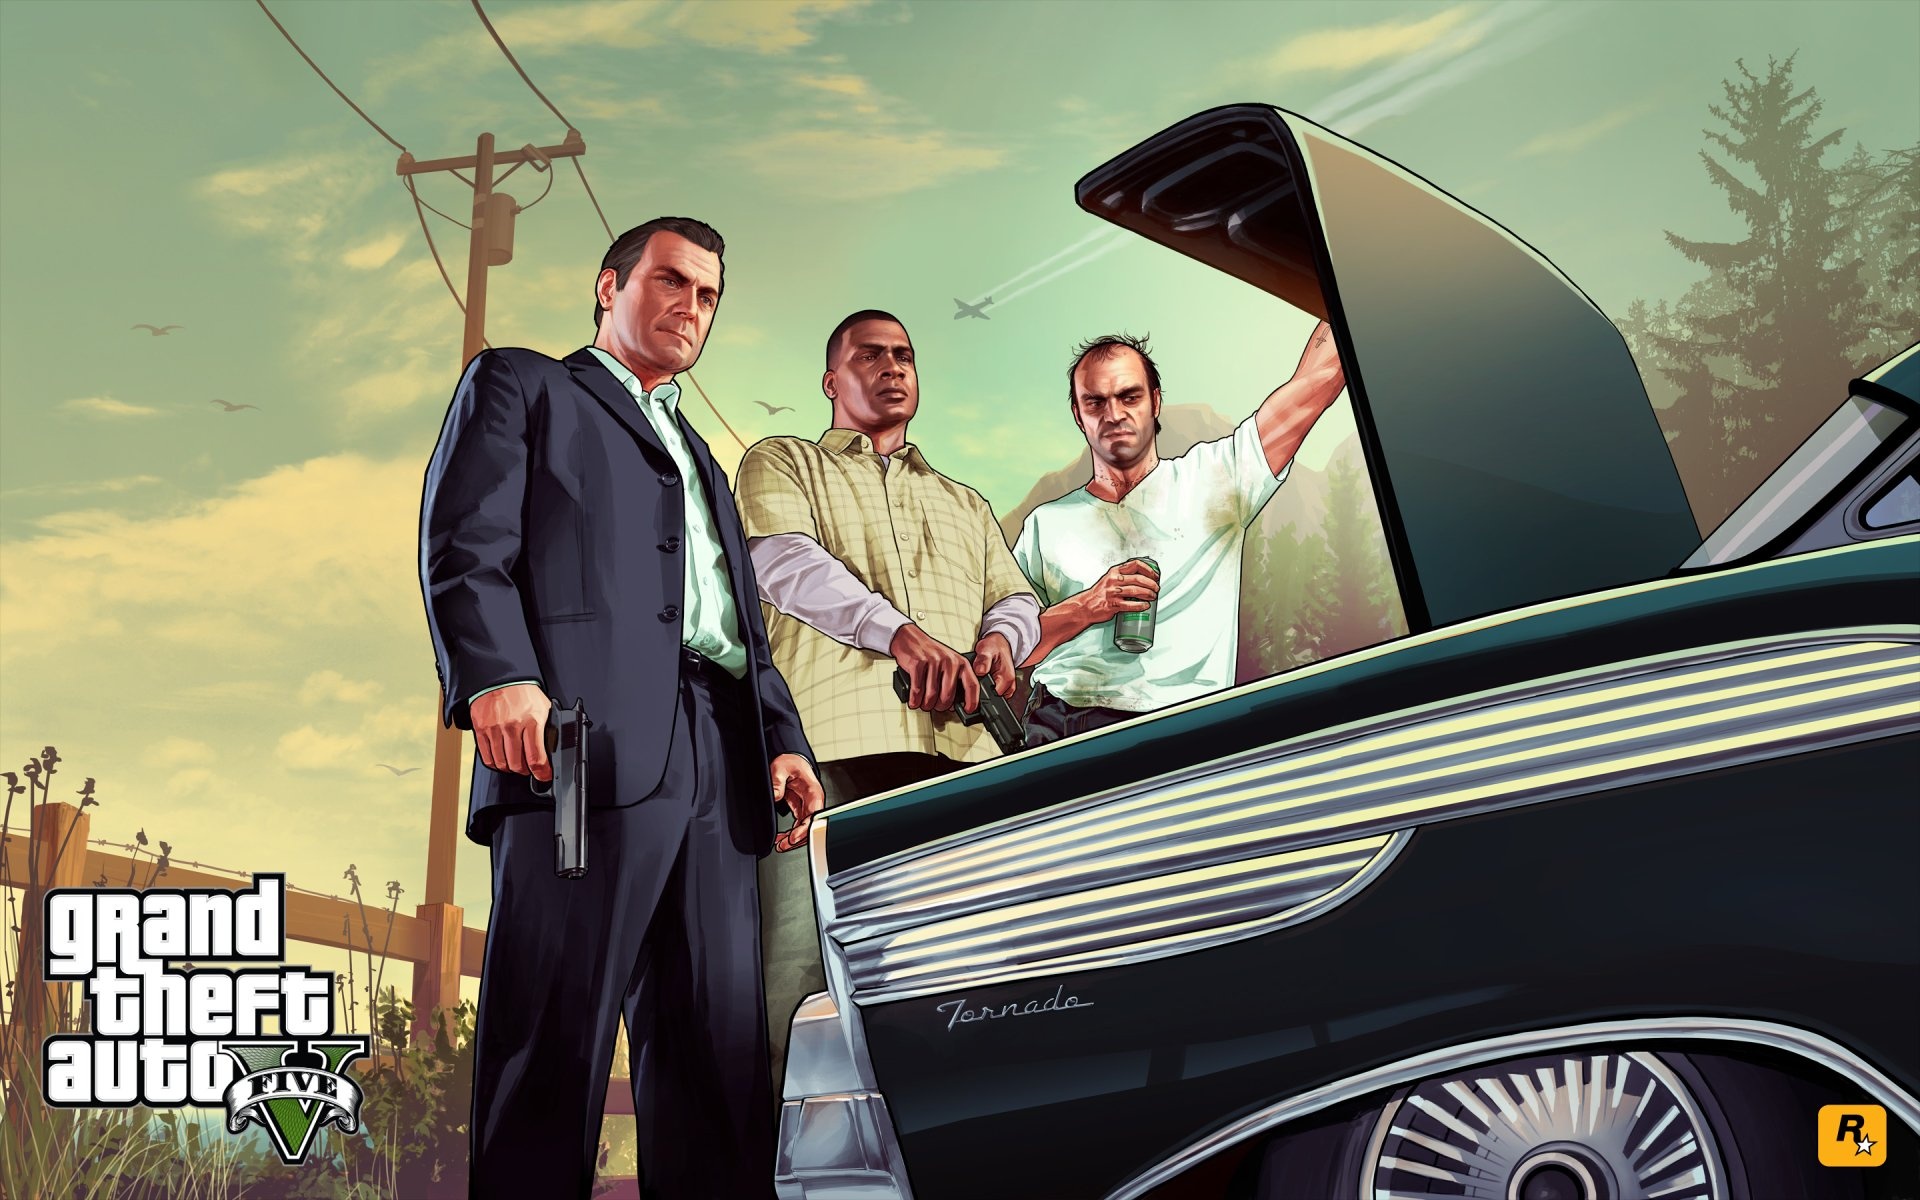 GTA V, Top 10 wallpapers, Must-have collection, EvedonusFilm's recommendations, 1920x1200 HD Desktop